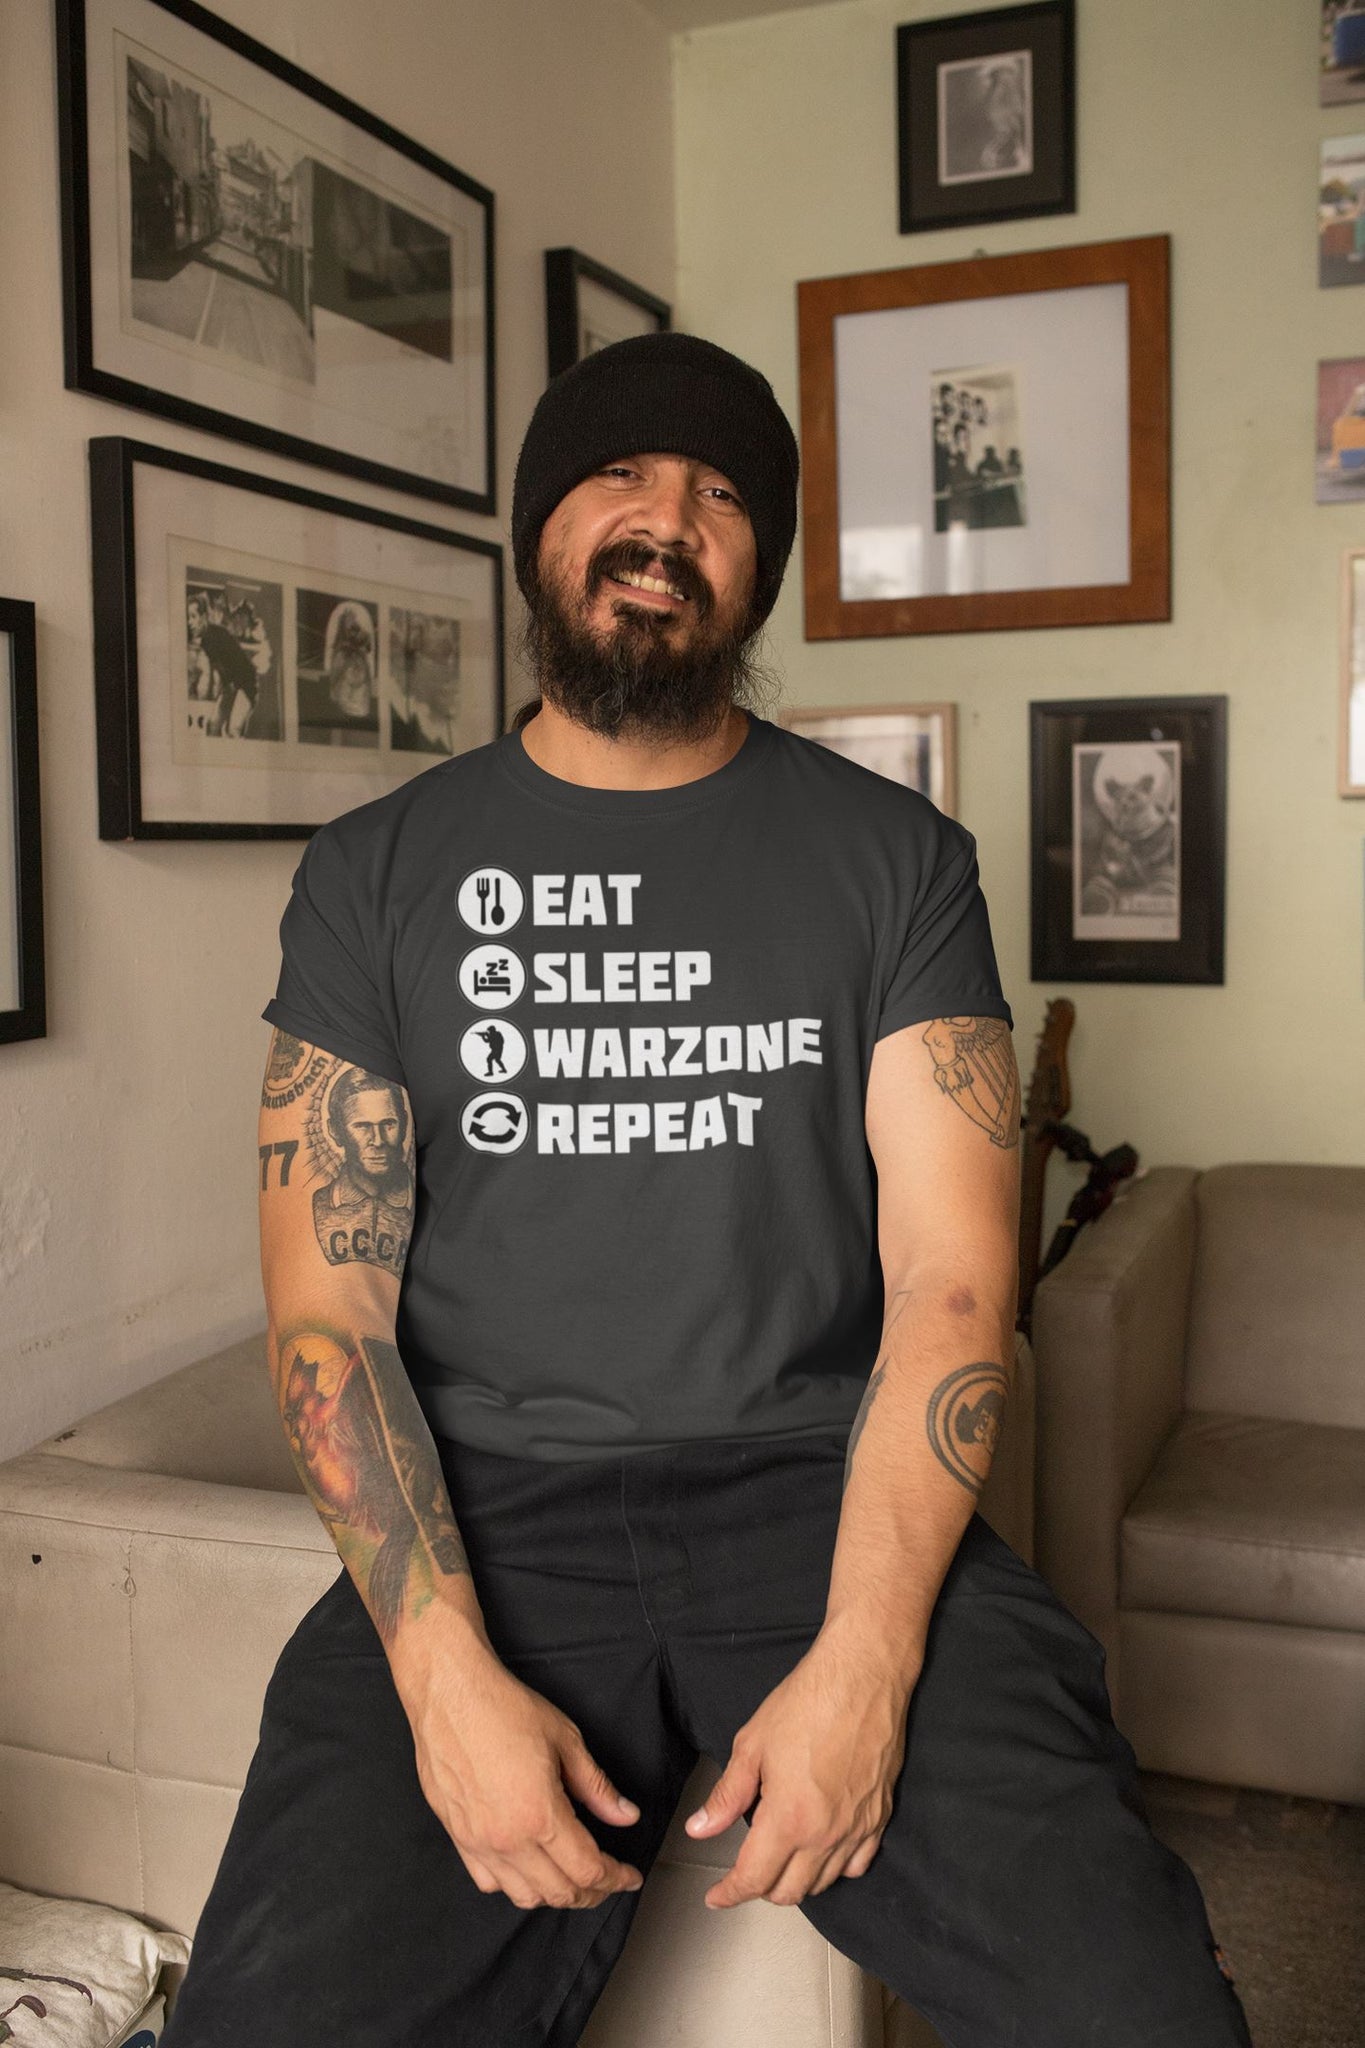 Eat Sleep Warzone Repeat Exclusive Call of Duty T Shirt for Men and Women freeshipping - Catch My Drift India